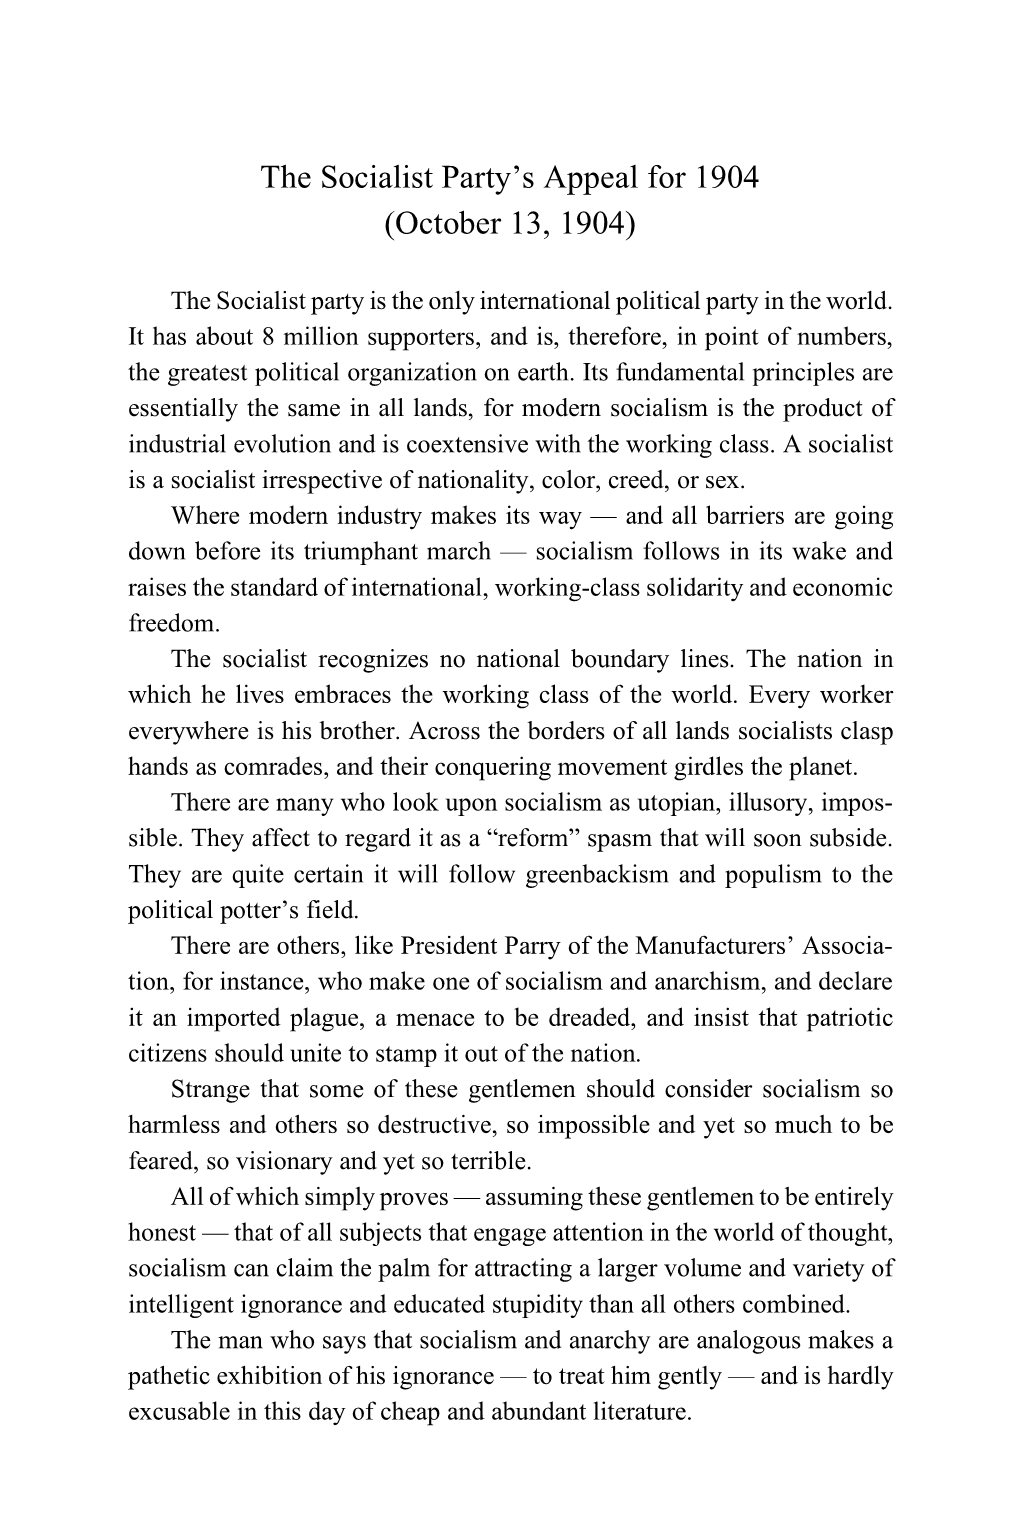 The Socialist Party's Appeal for 1904 (October 13, 1904)